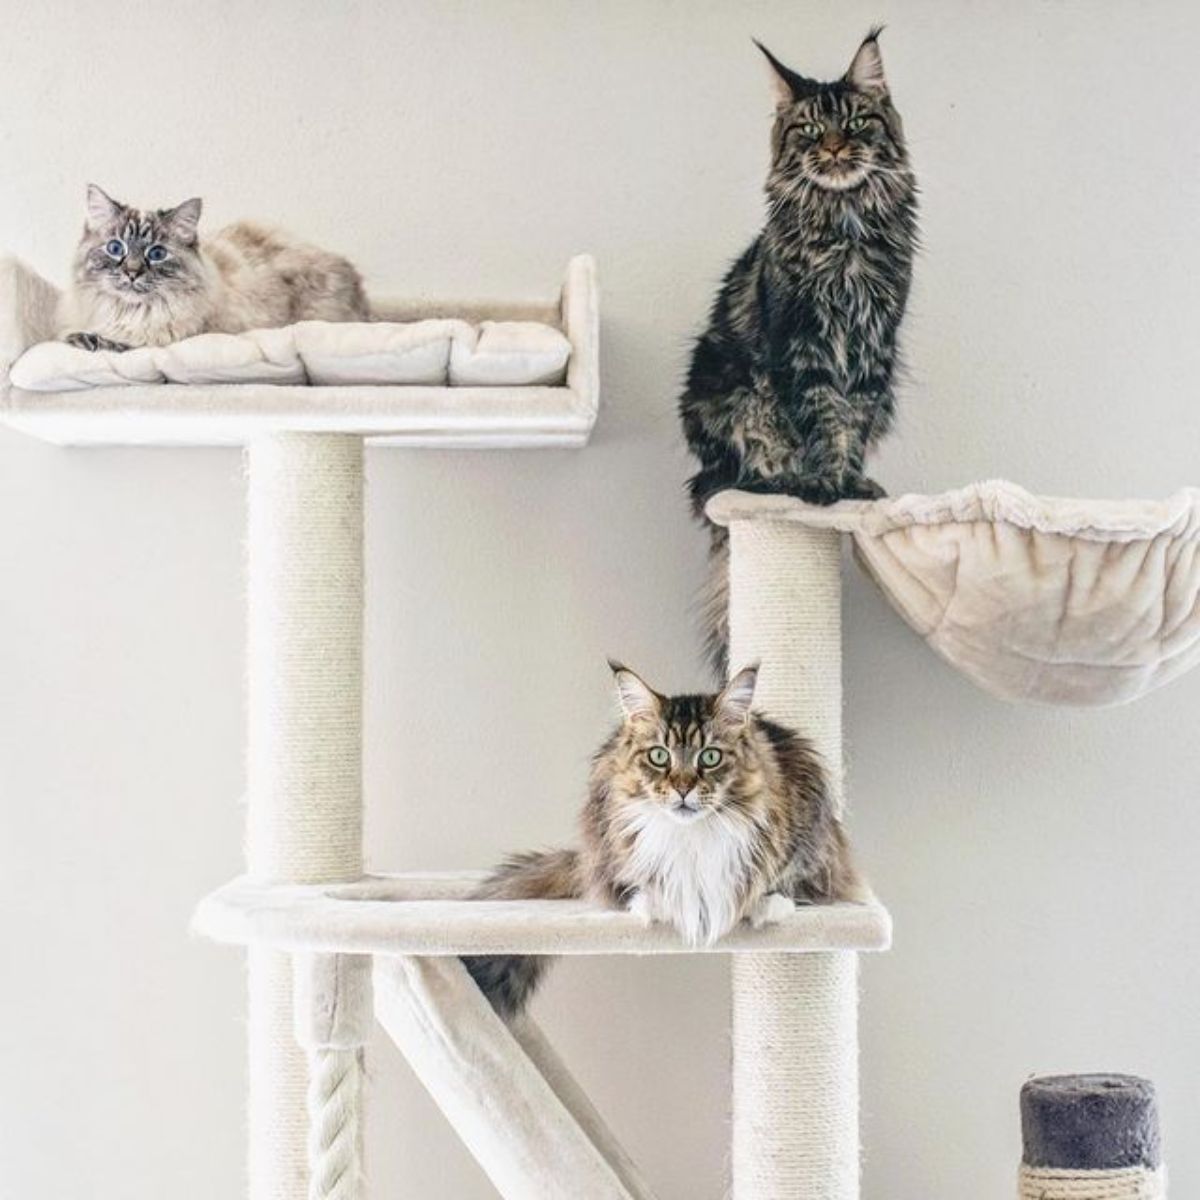 Three fluffy maine coons relaxing on a cat tree.